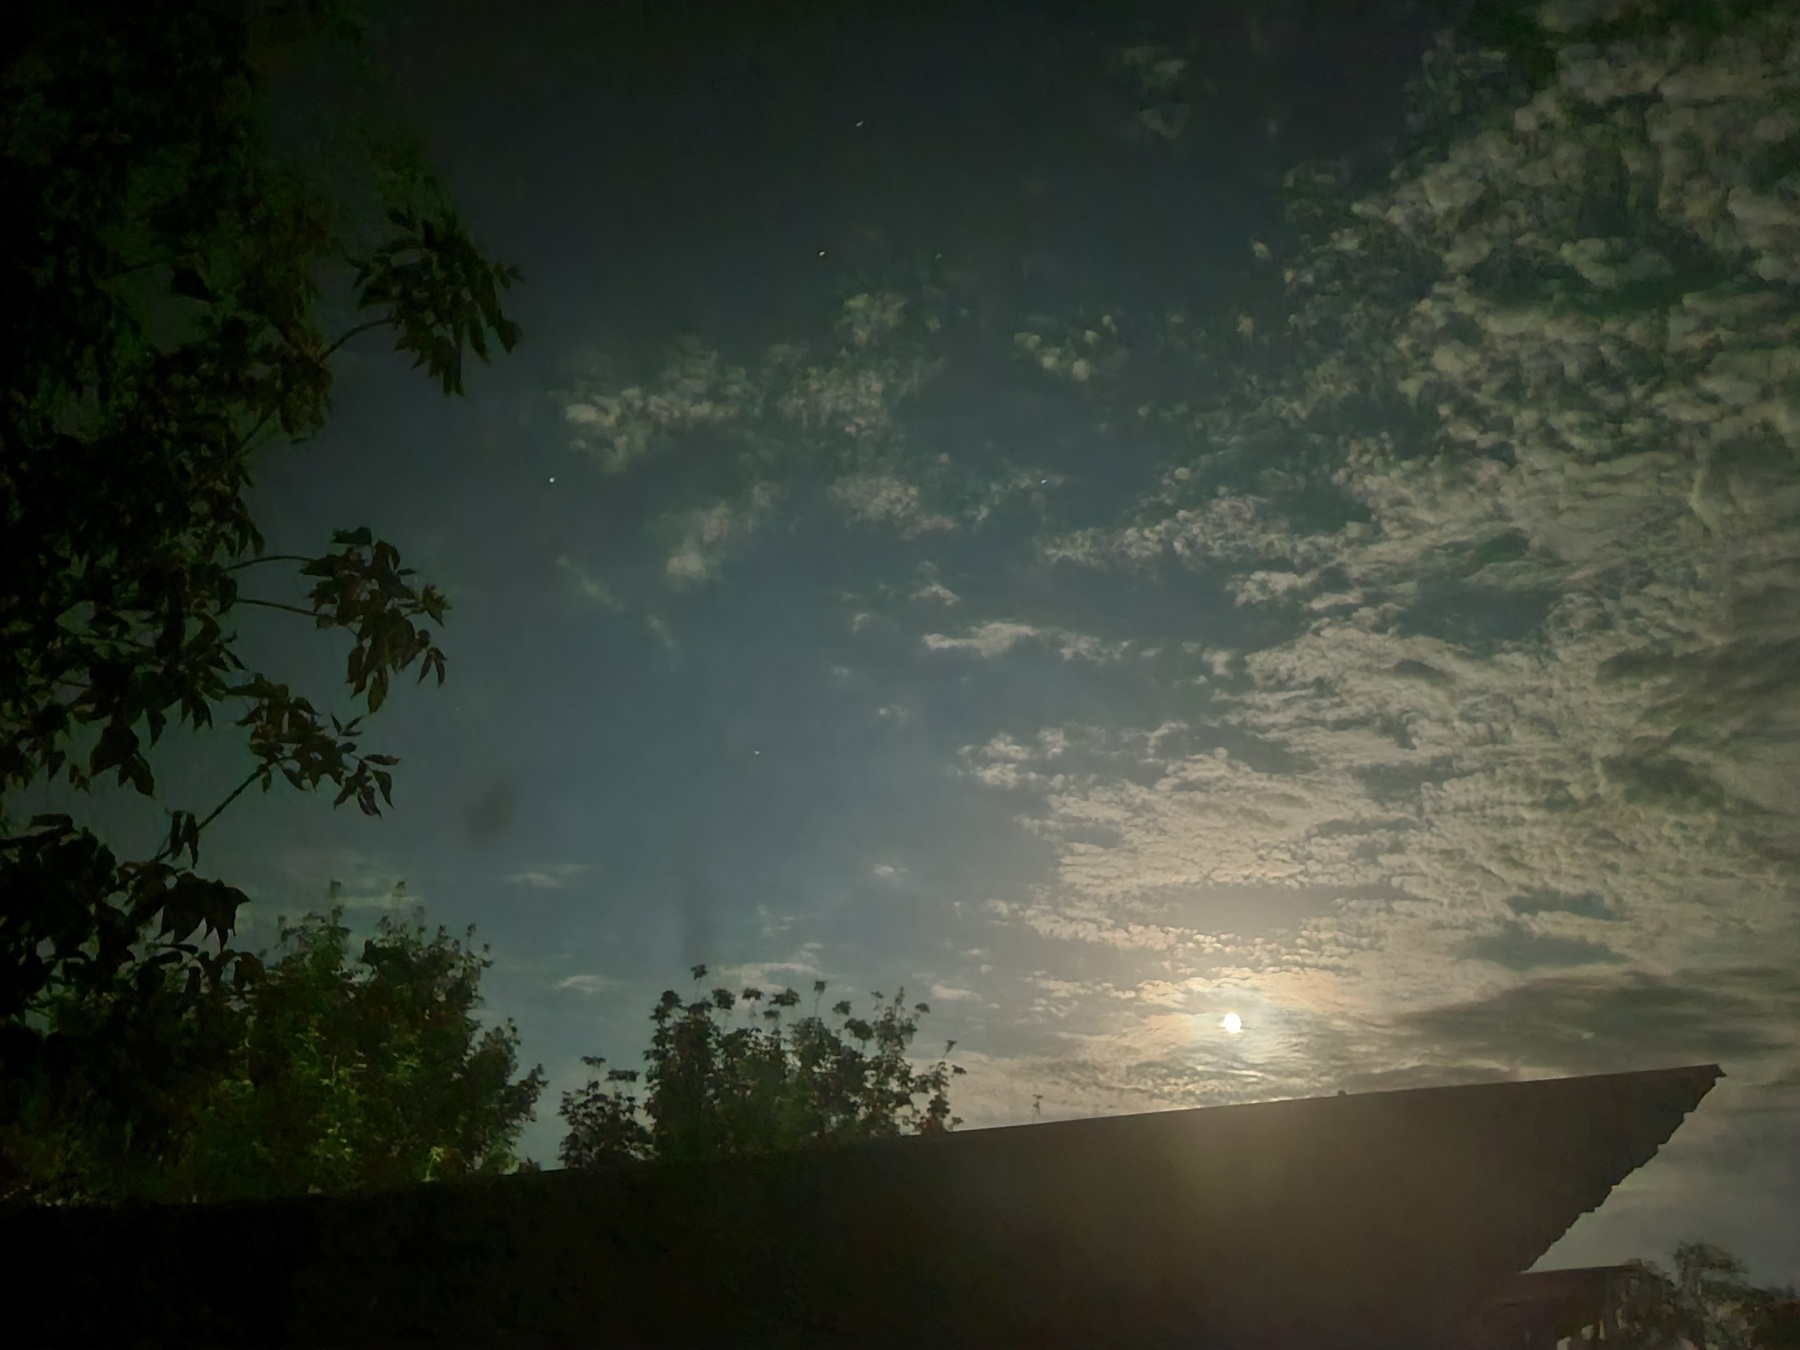 at night, roof of a building visible. tree on the left, full moon shining in the sky, and clouds to the right of the moon